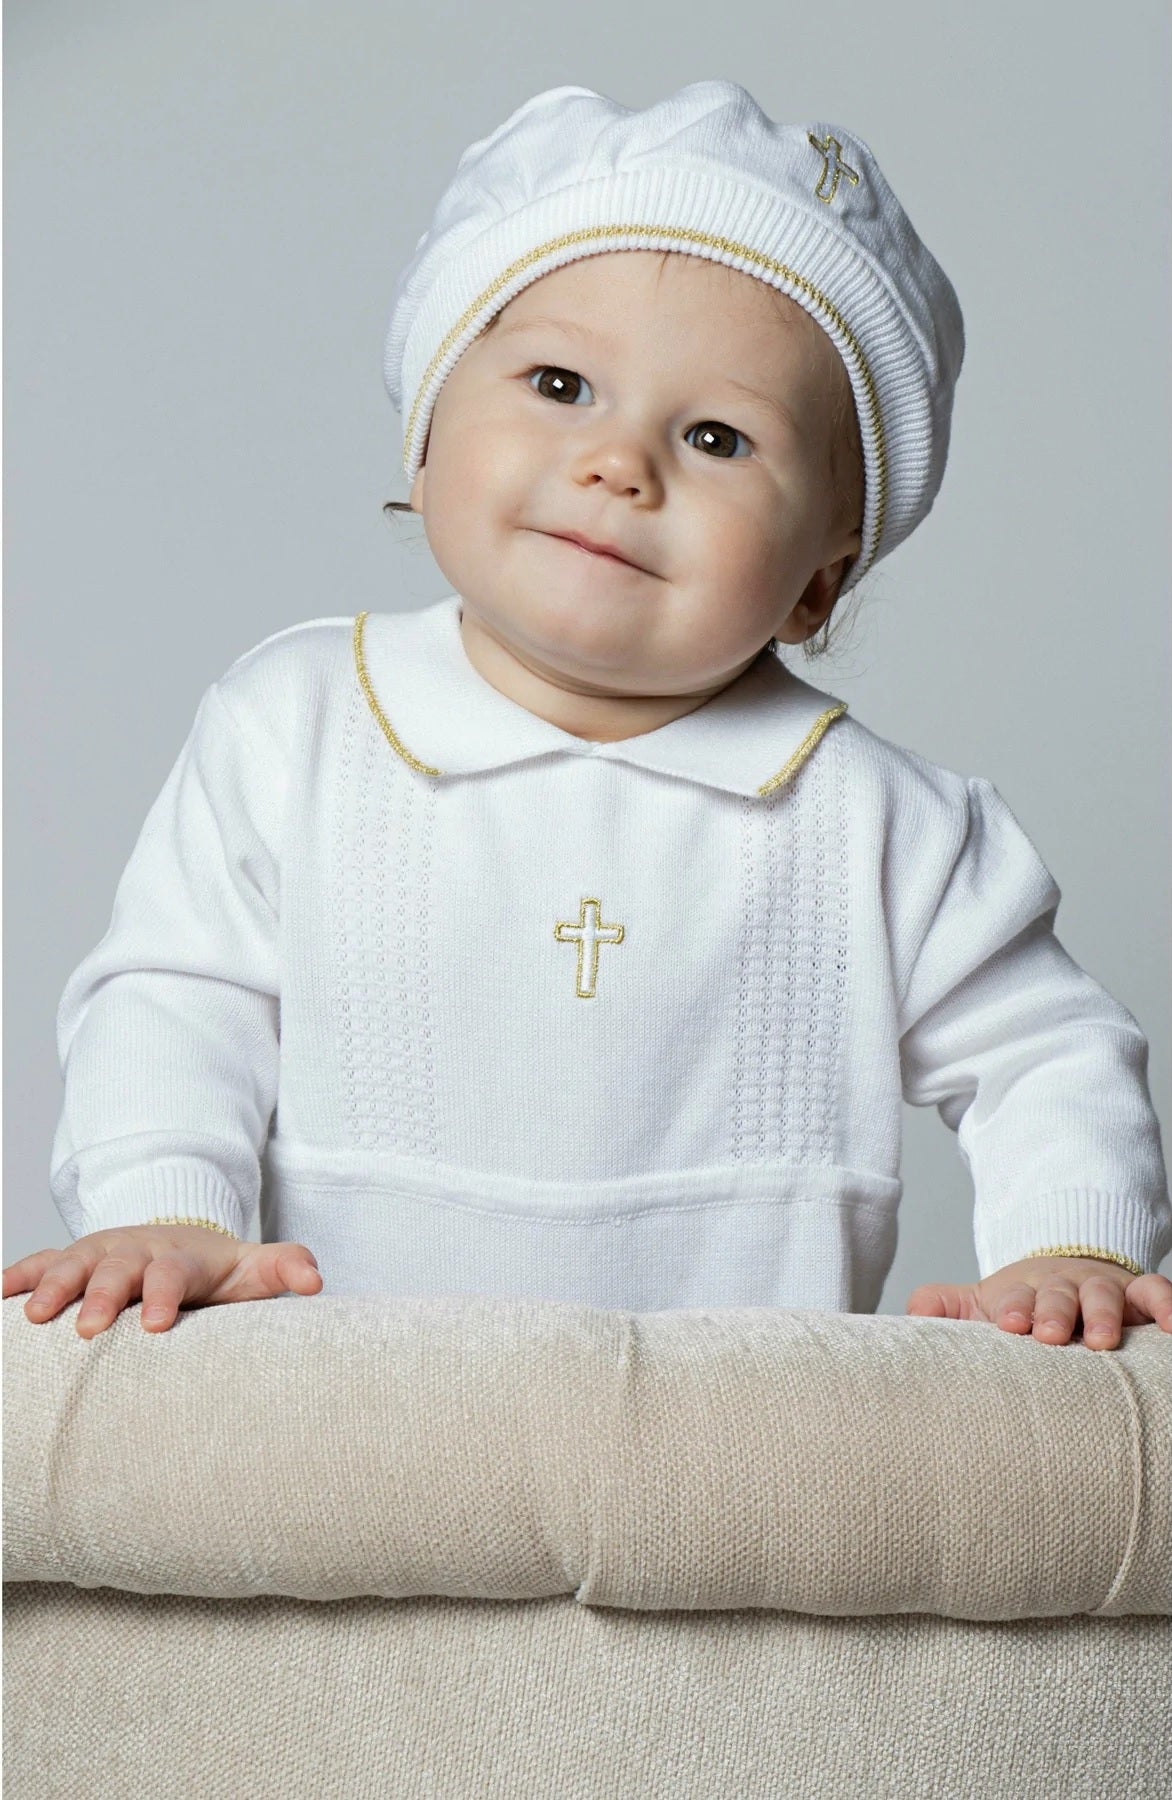 Baptism Outfits for Boys - Carriage Boutique